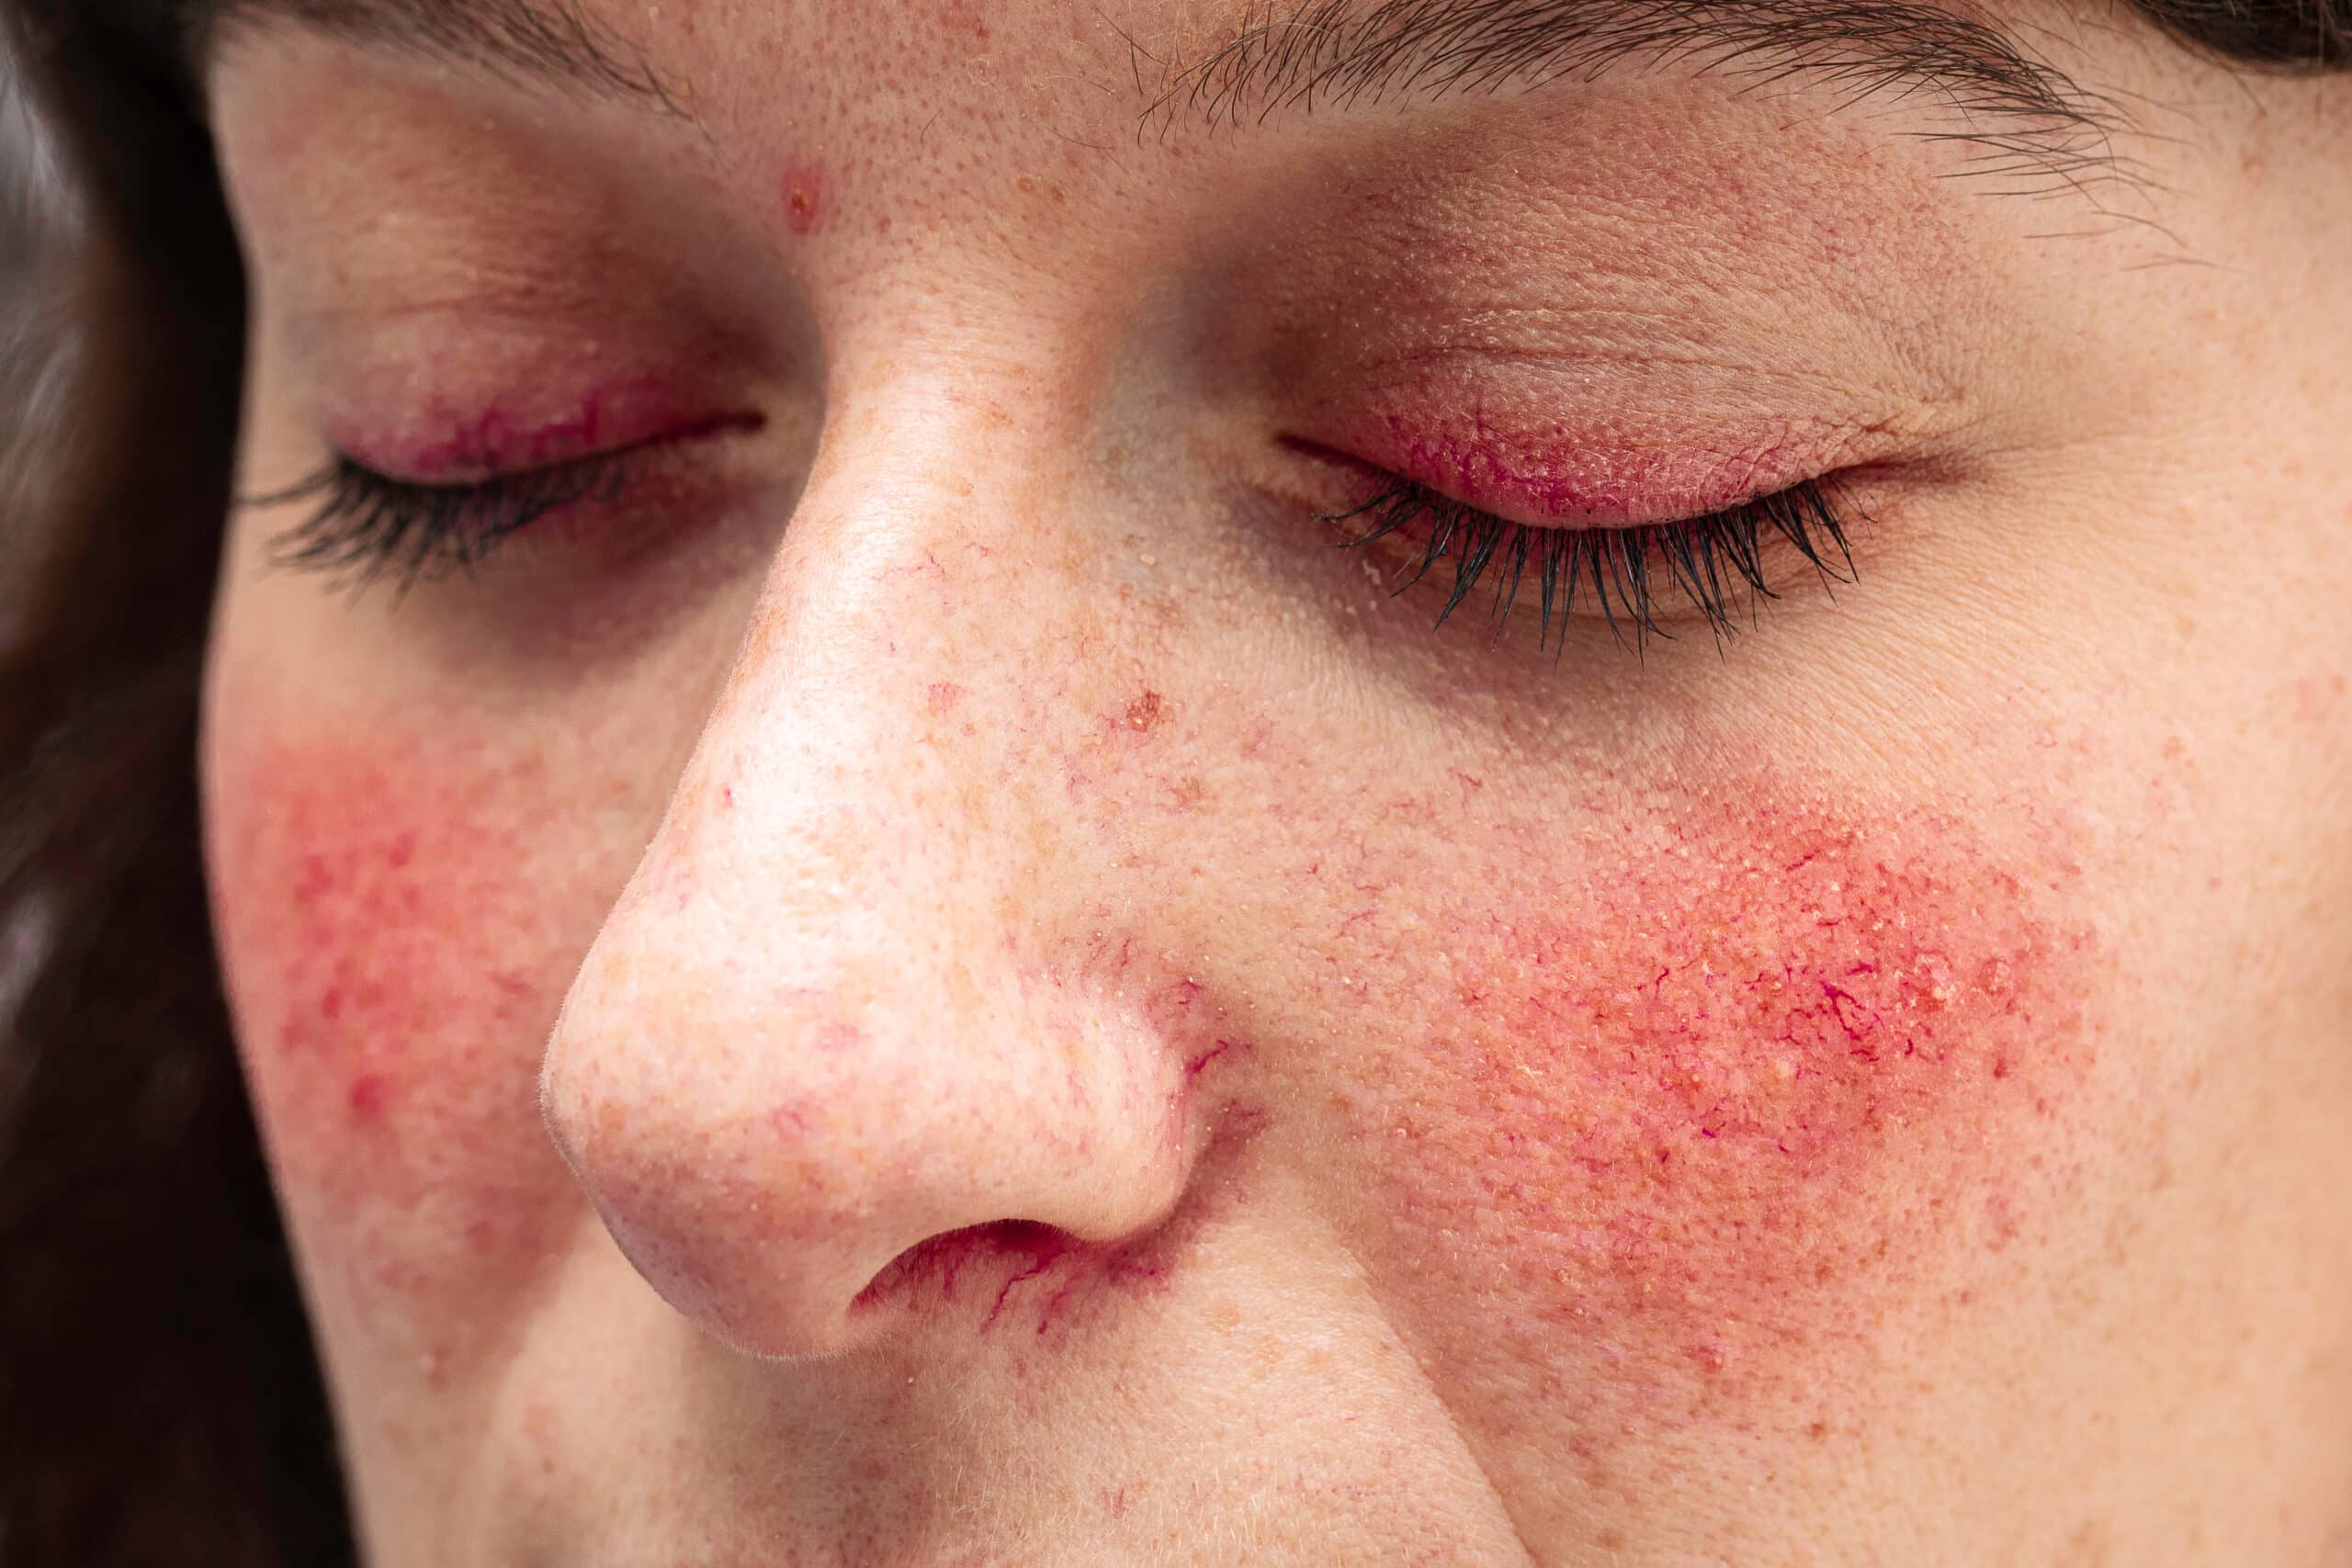 close view of woman's cheeks with redness